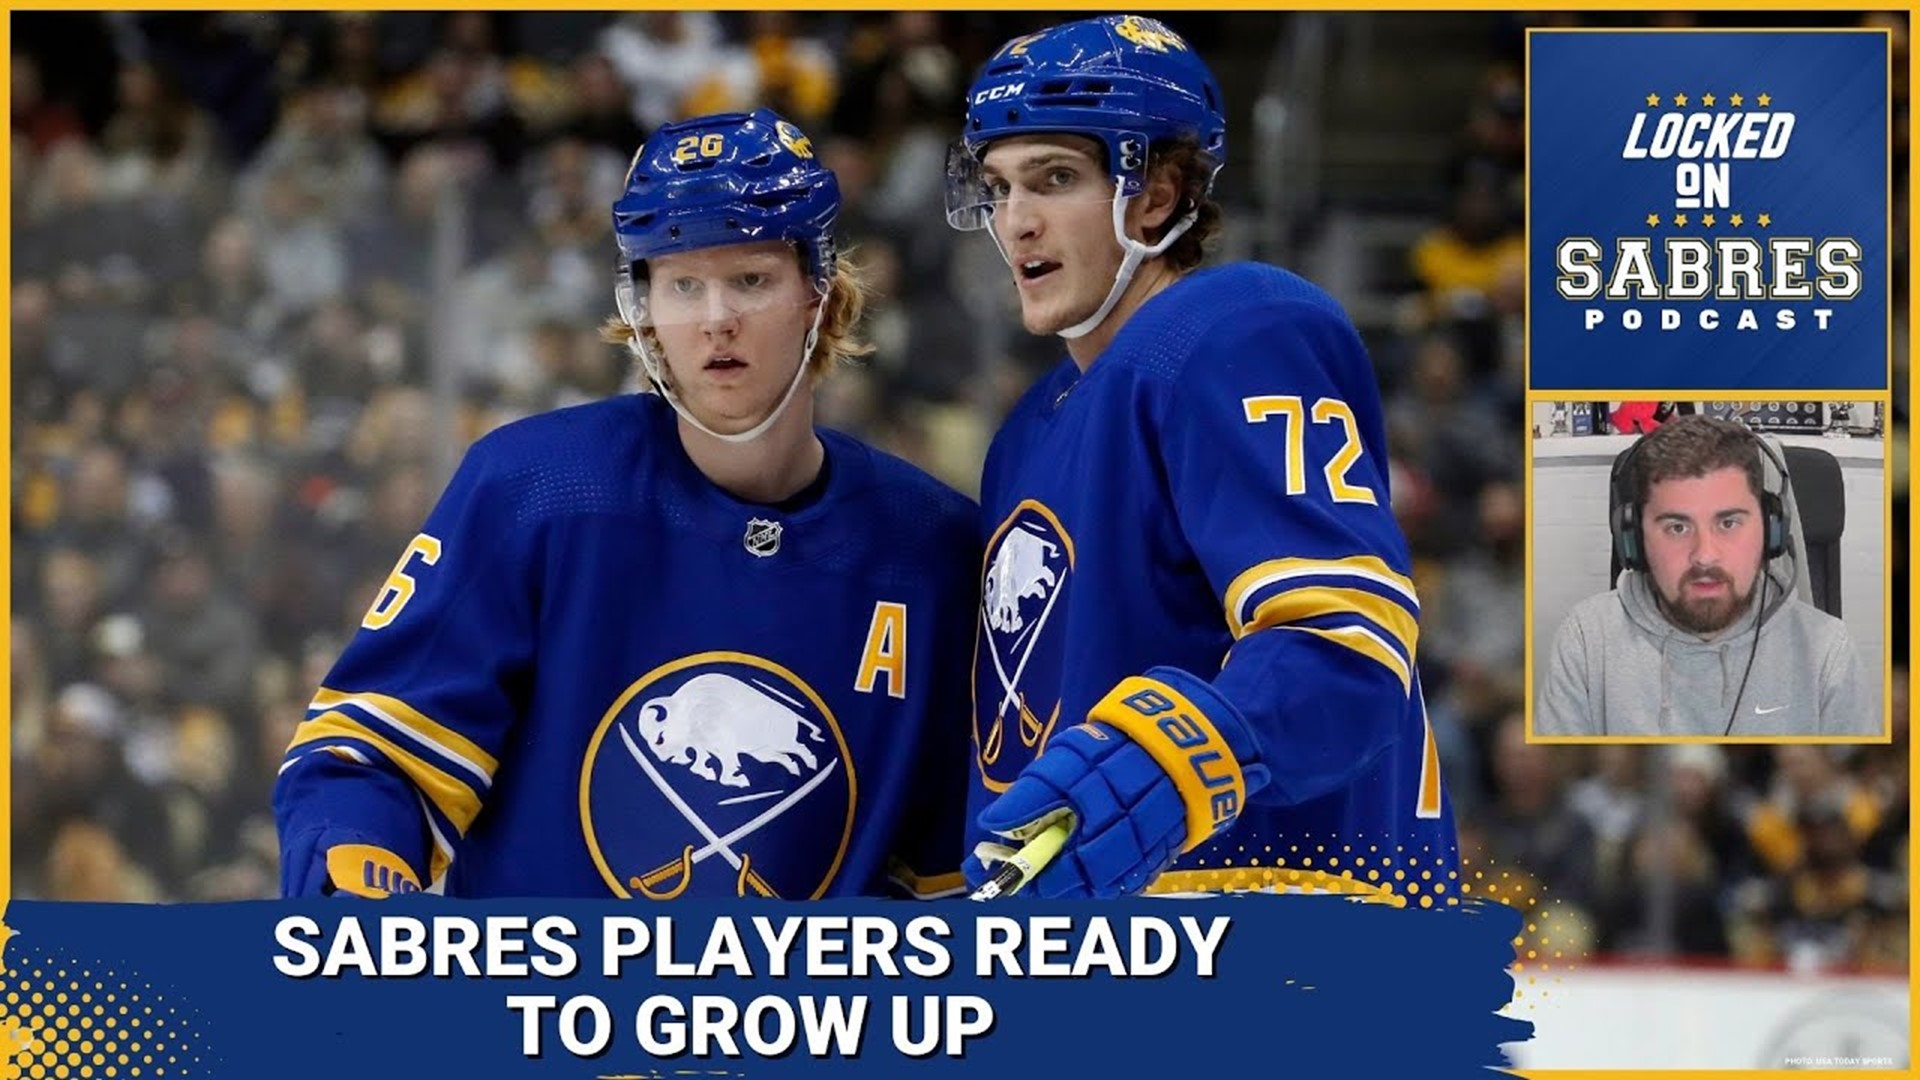 Sabres players ready to be pushed, grow up with new coach